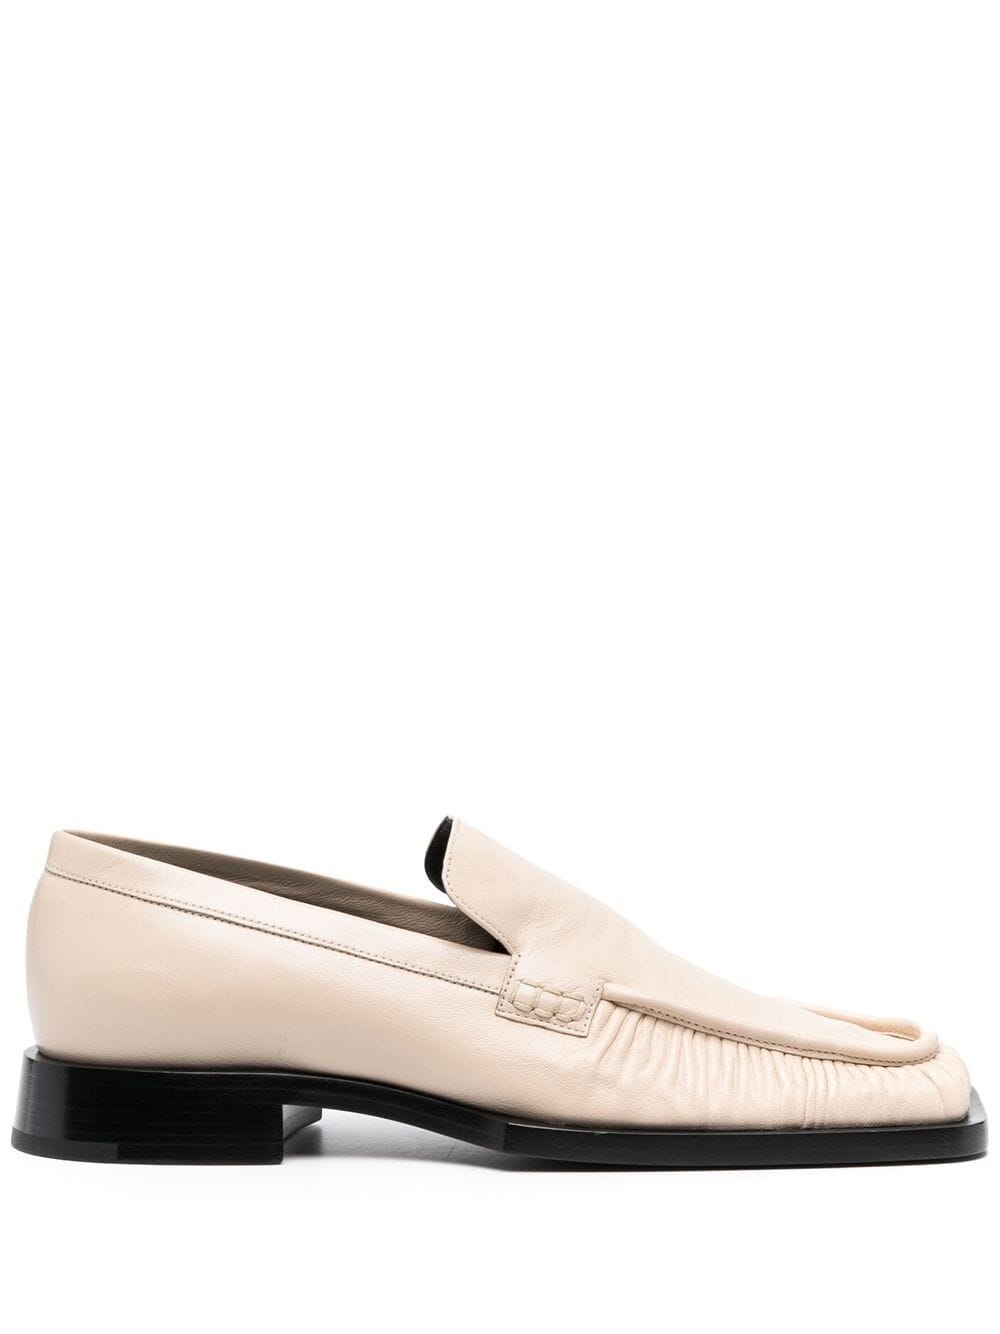 Jil Sander Square-toe Leather Loafers In Neutrals